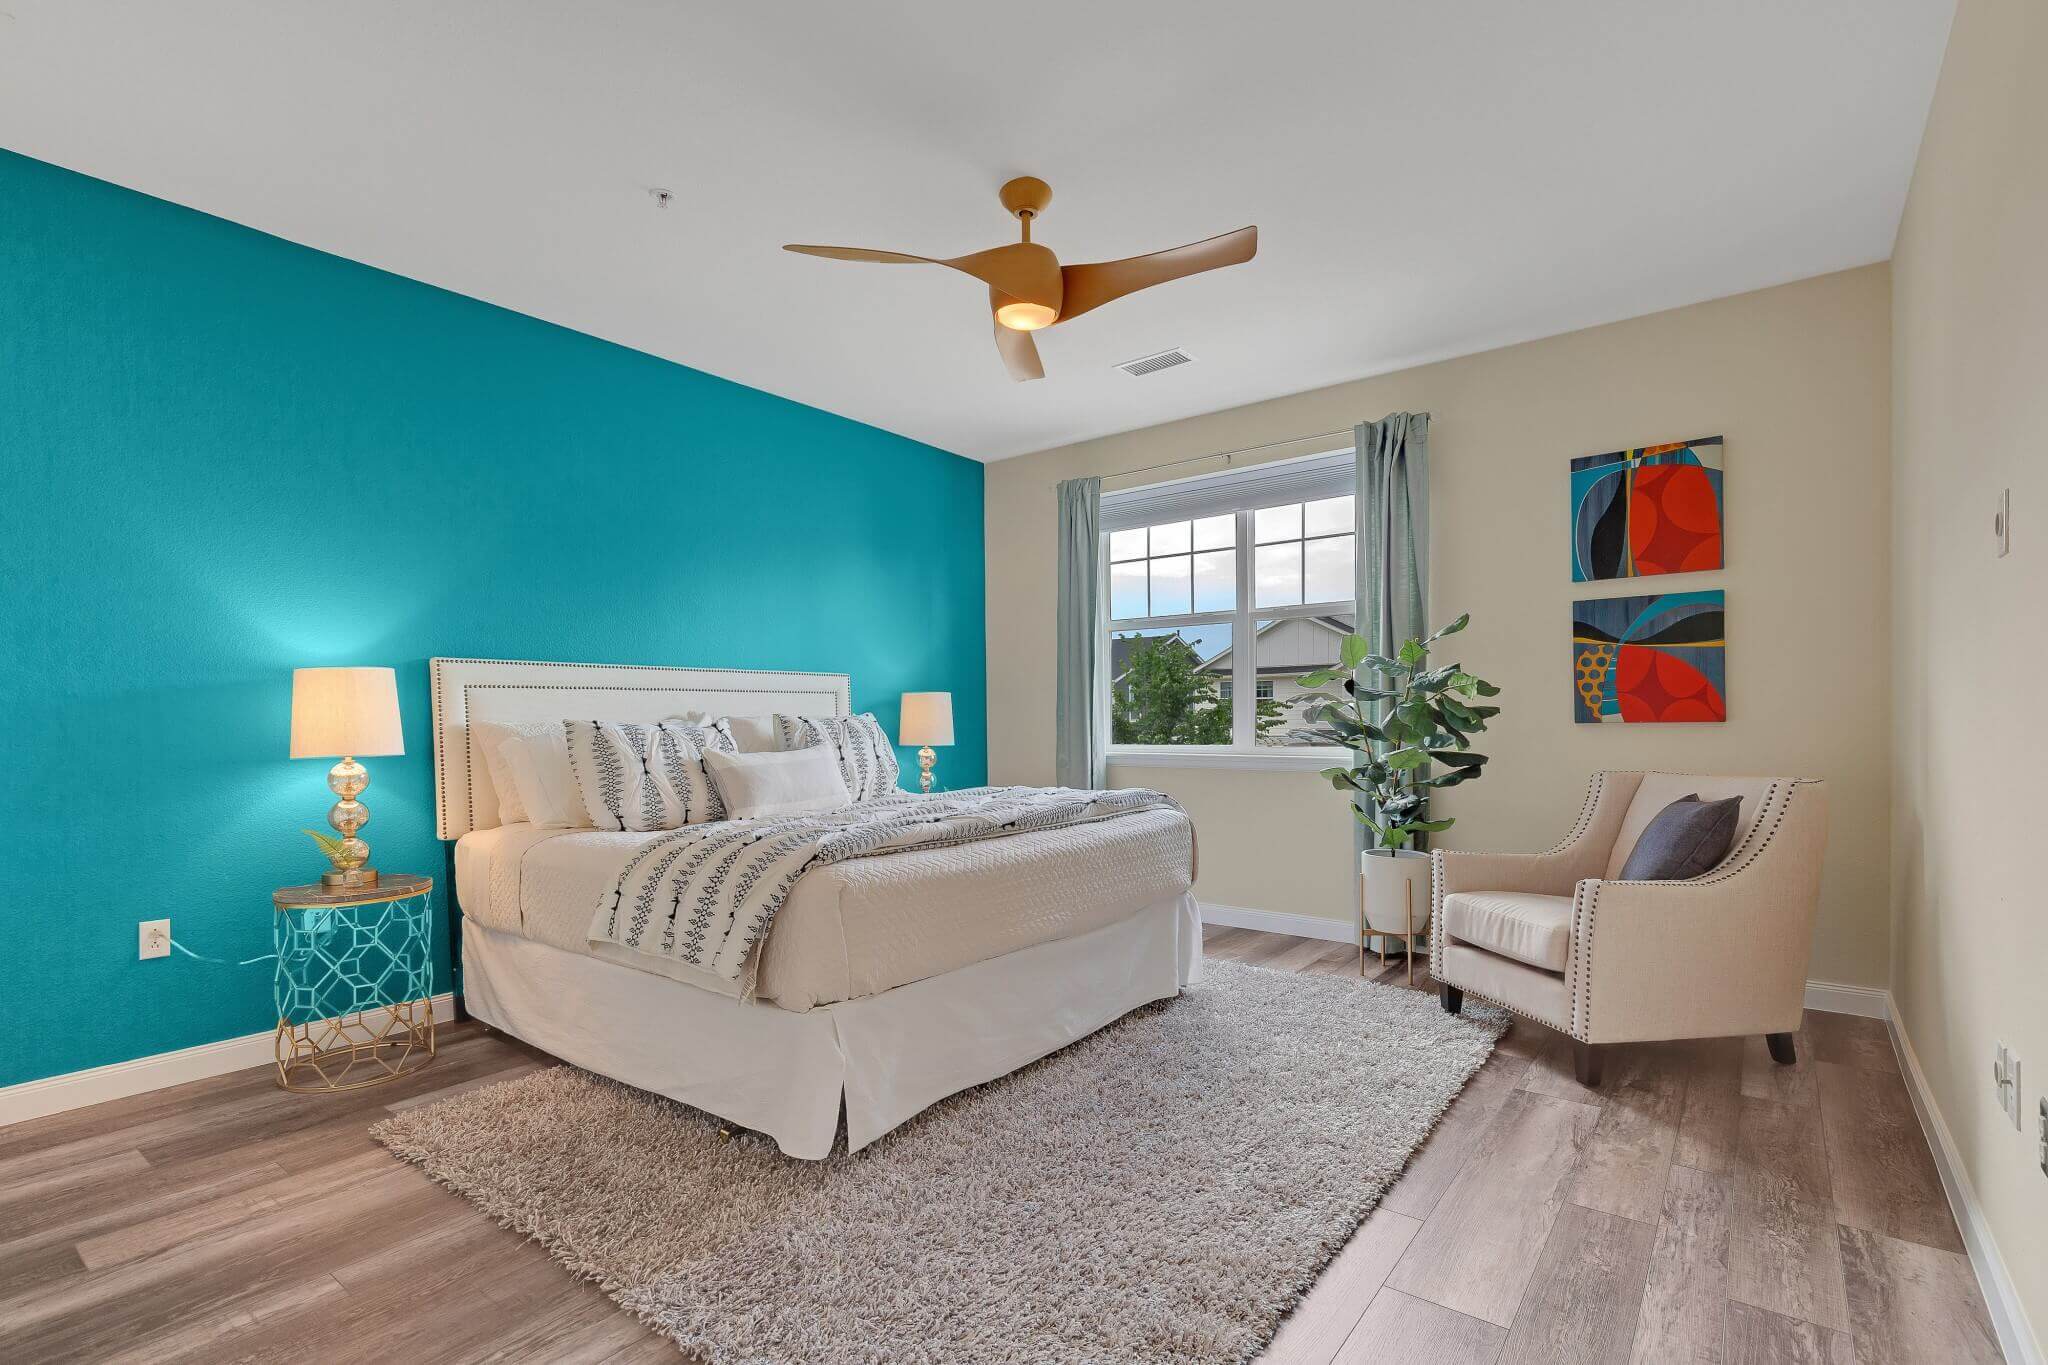 Bedroom with teal and beige walls, wood floor, ceiling fan and window.